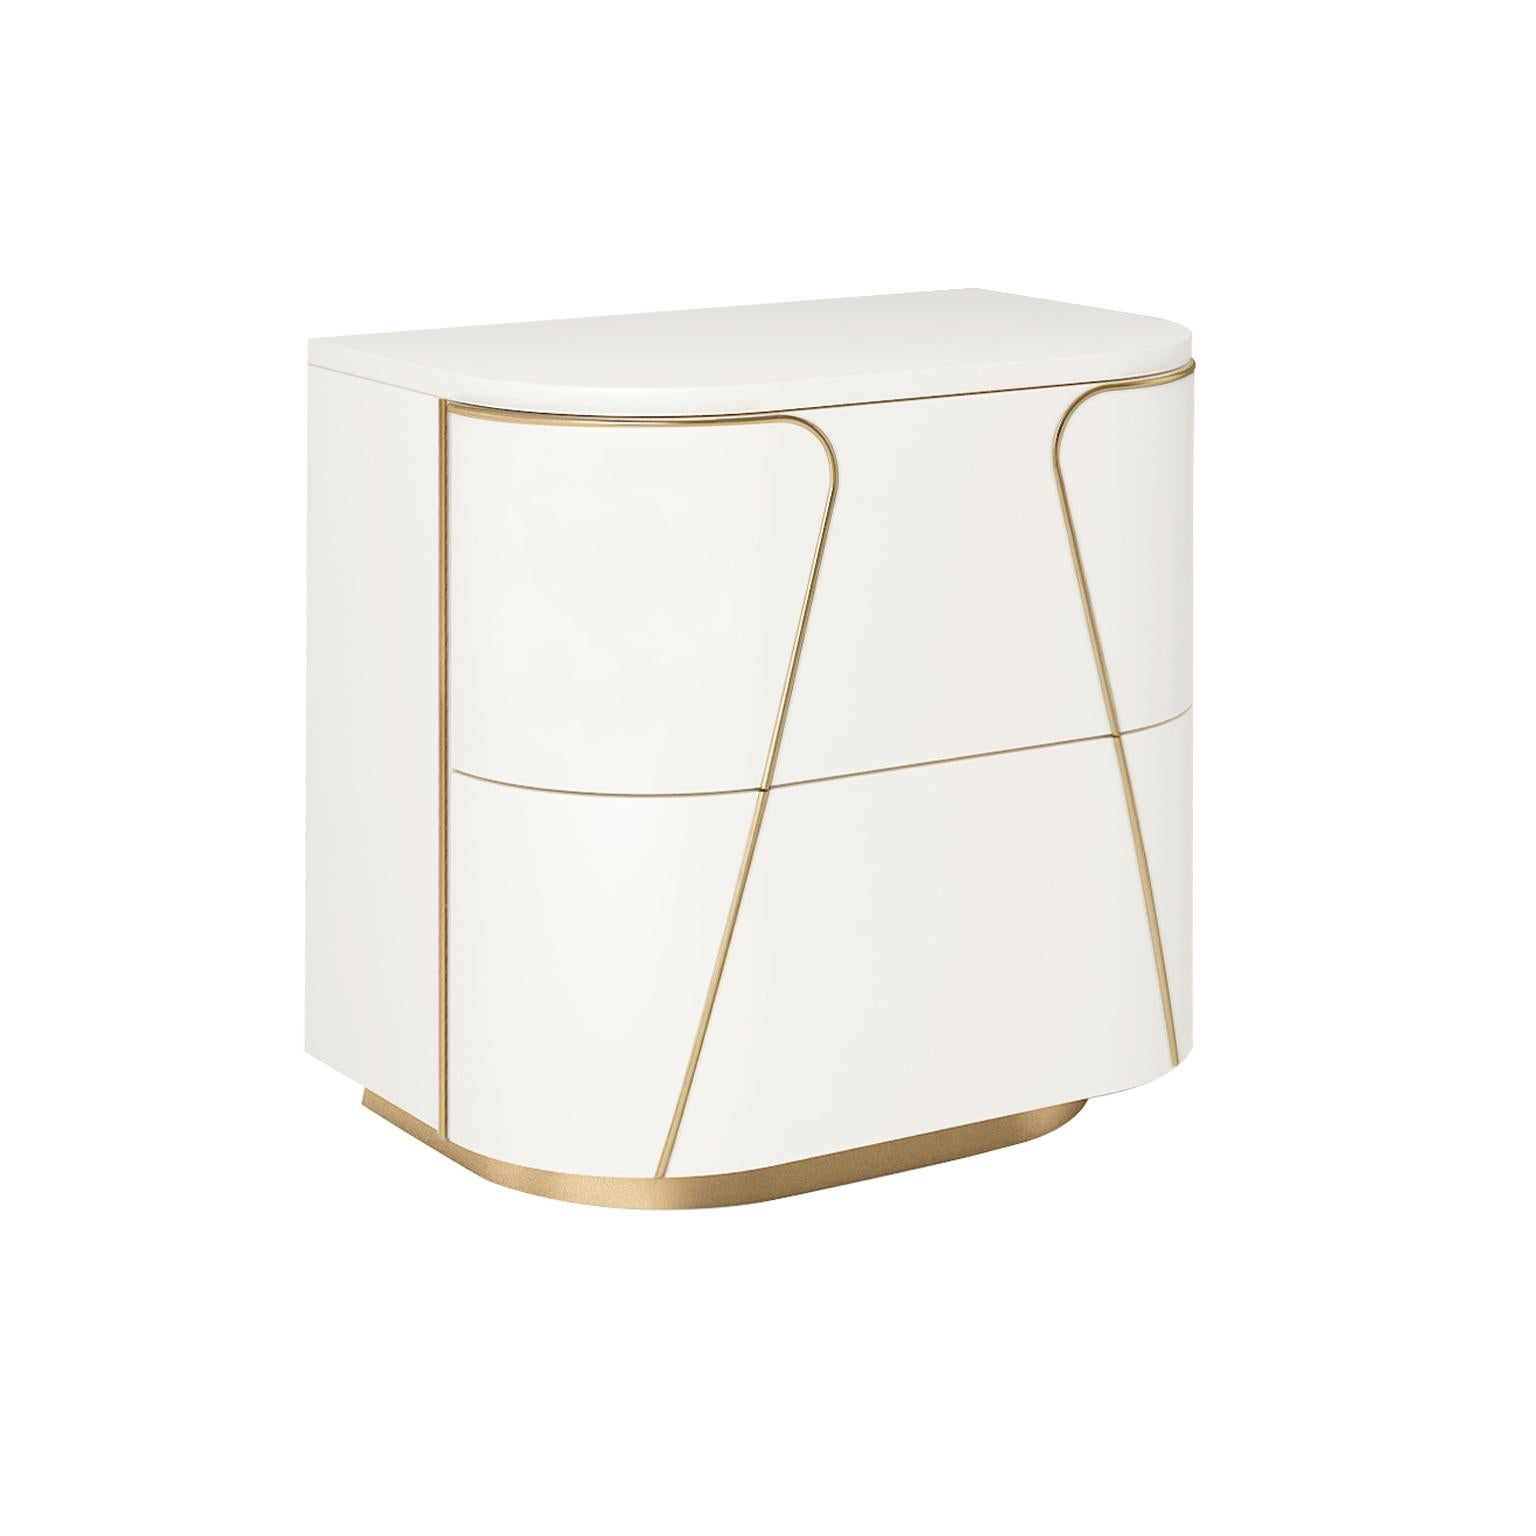 Designed by IC and realized by expert Italian artisans, the Gemma nightstand features rounded corners and brass – or powder coated metal – details. A beautiful design that will bring elegance and sophistication to any bedroom.
Accessories and